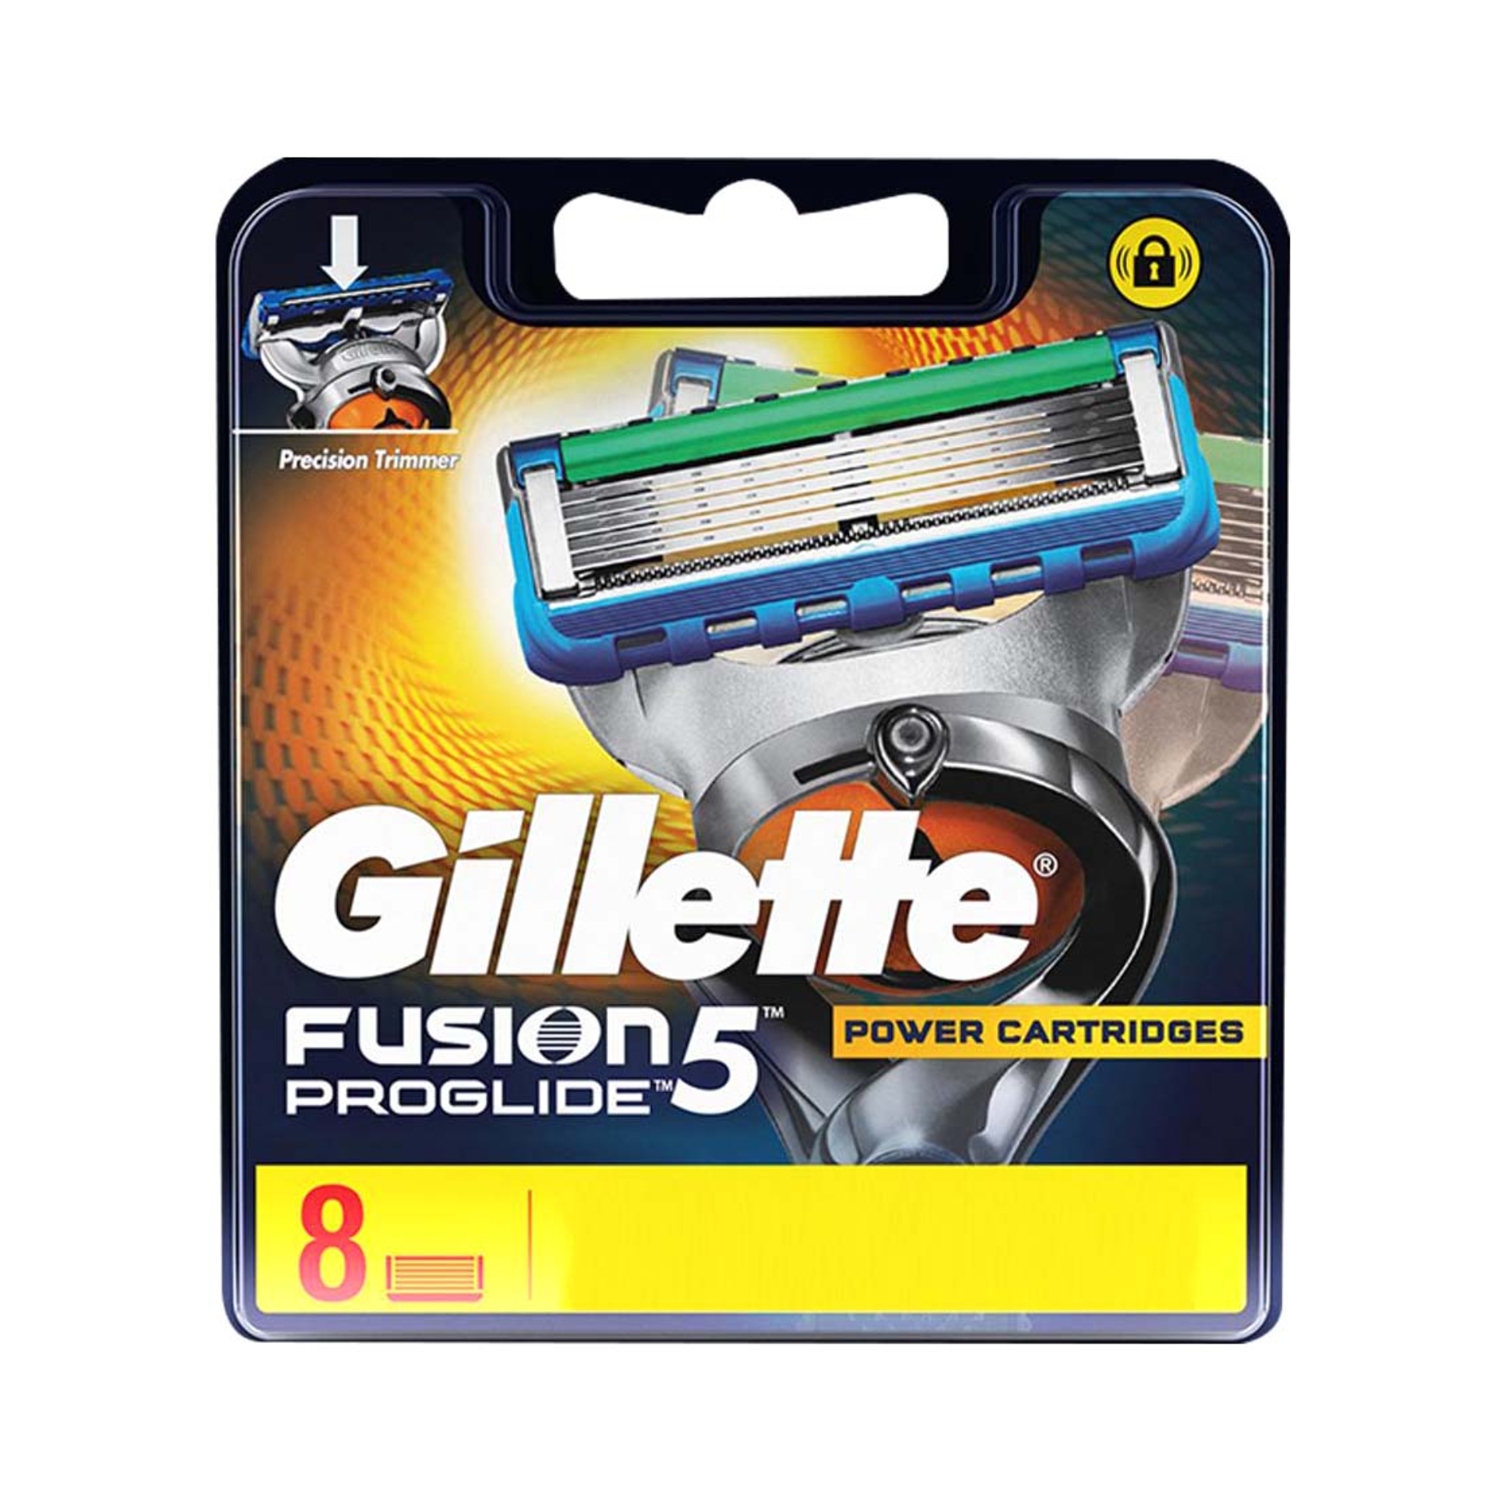 Gillette | Gillette Fusion Proglide Blades for Perfect Shave and Perfect Beard Shape (8Pcs)